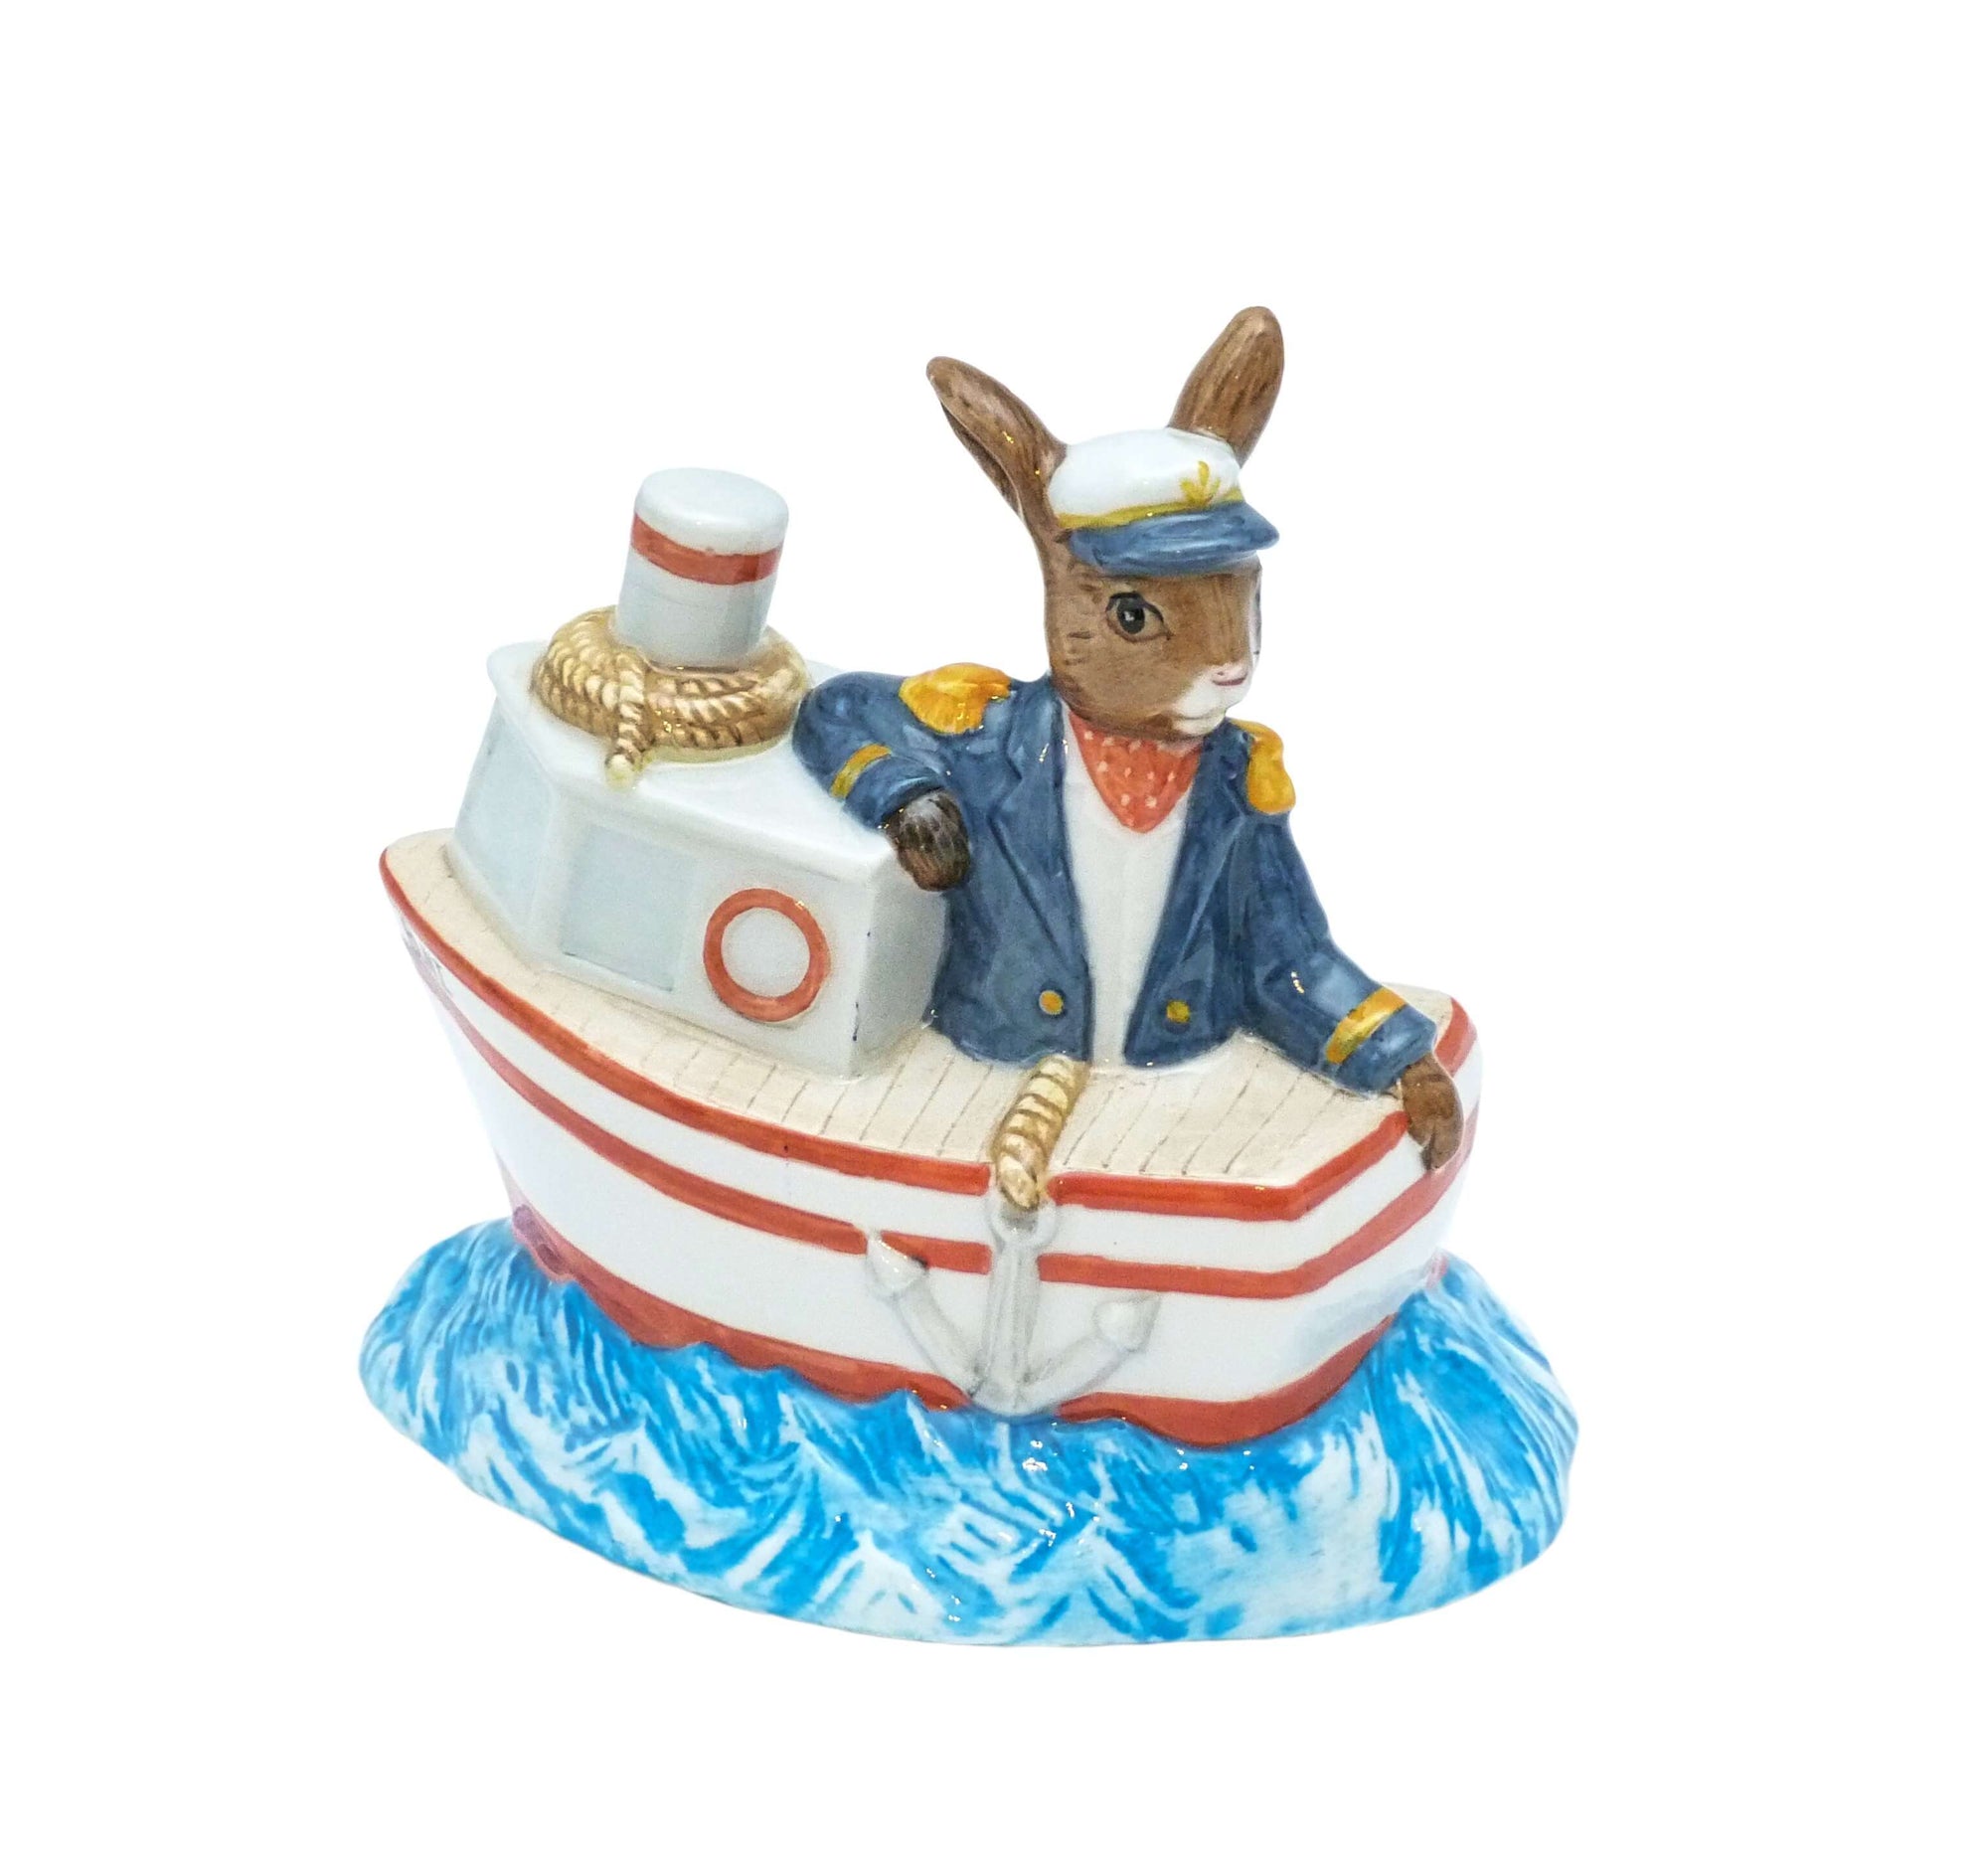 The bunnykin is in his boat, he is wearing a sailor cap and blue coat with gold epaulets.